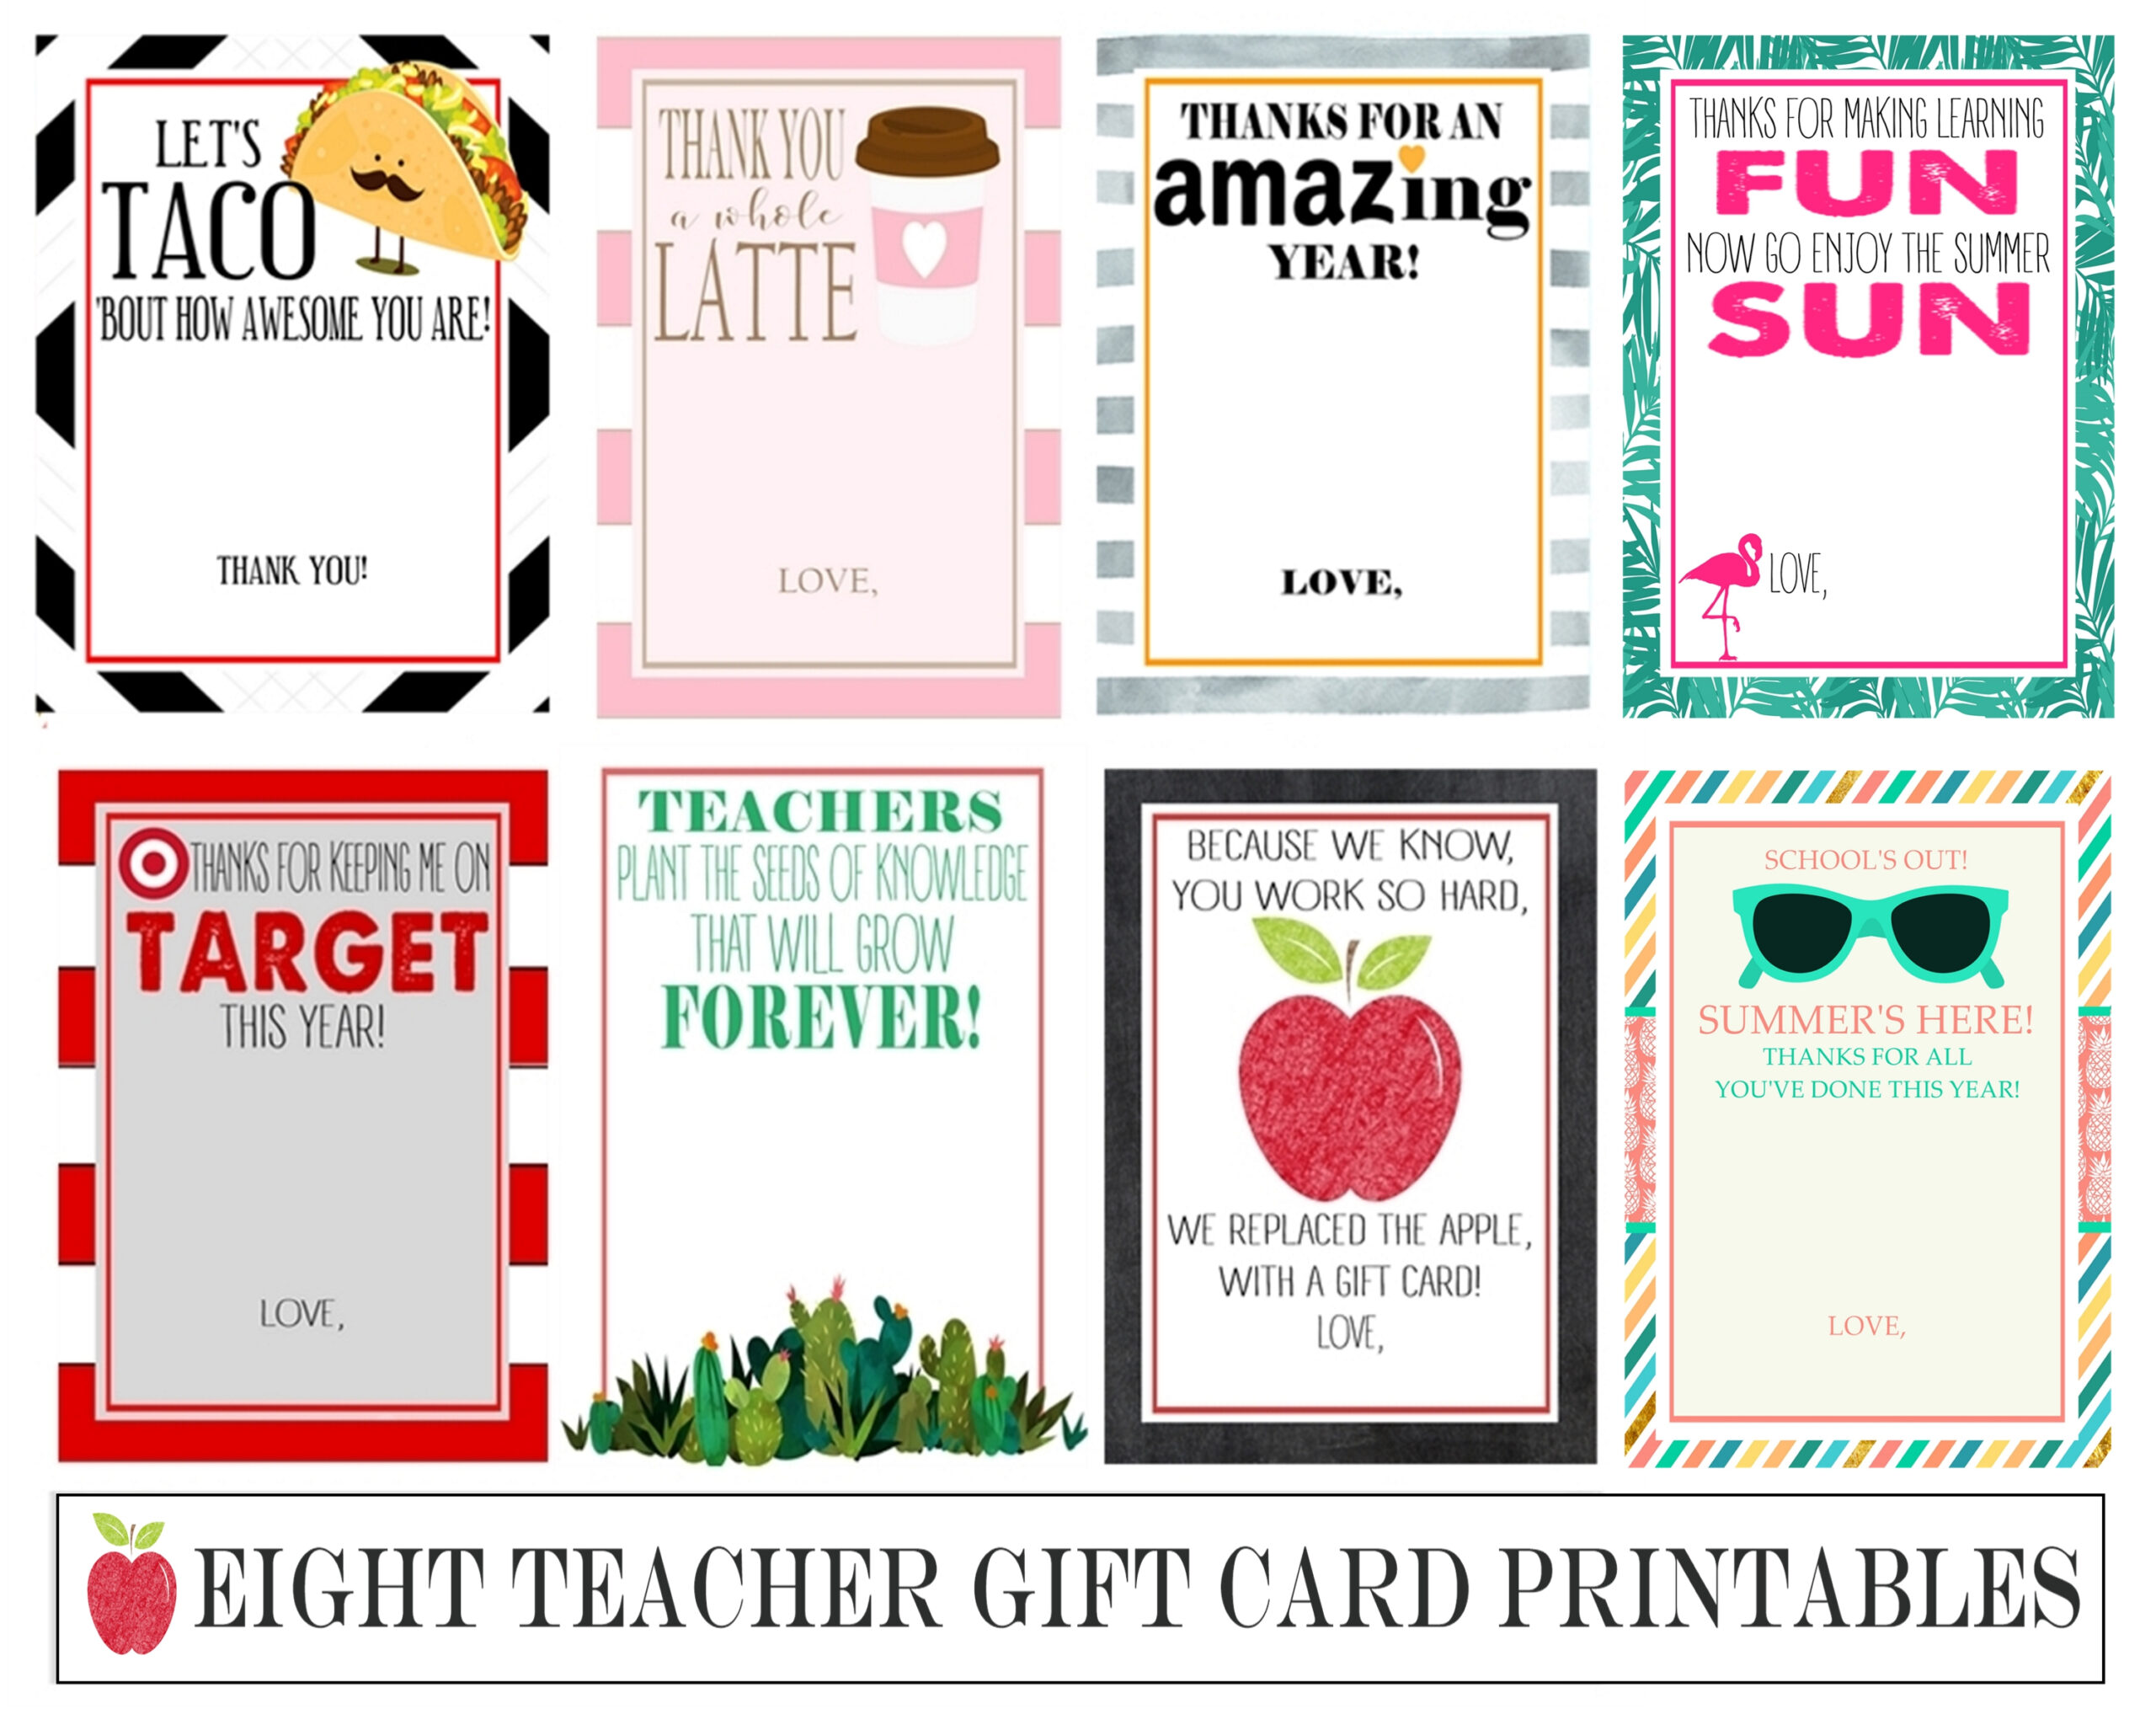 25 Electronic Gift Card Options And 8 Teacher Gift Card Printables - Printable Gift Cards For Free